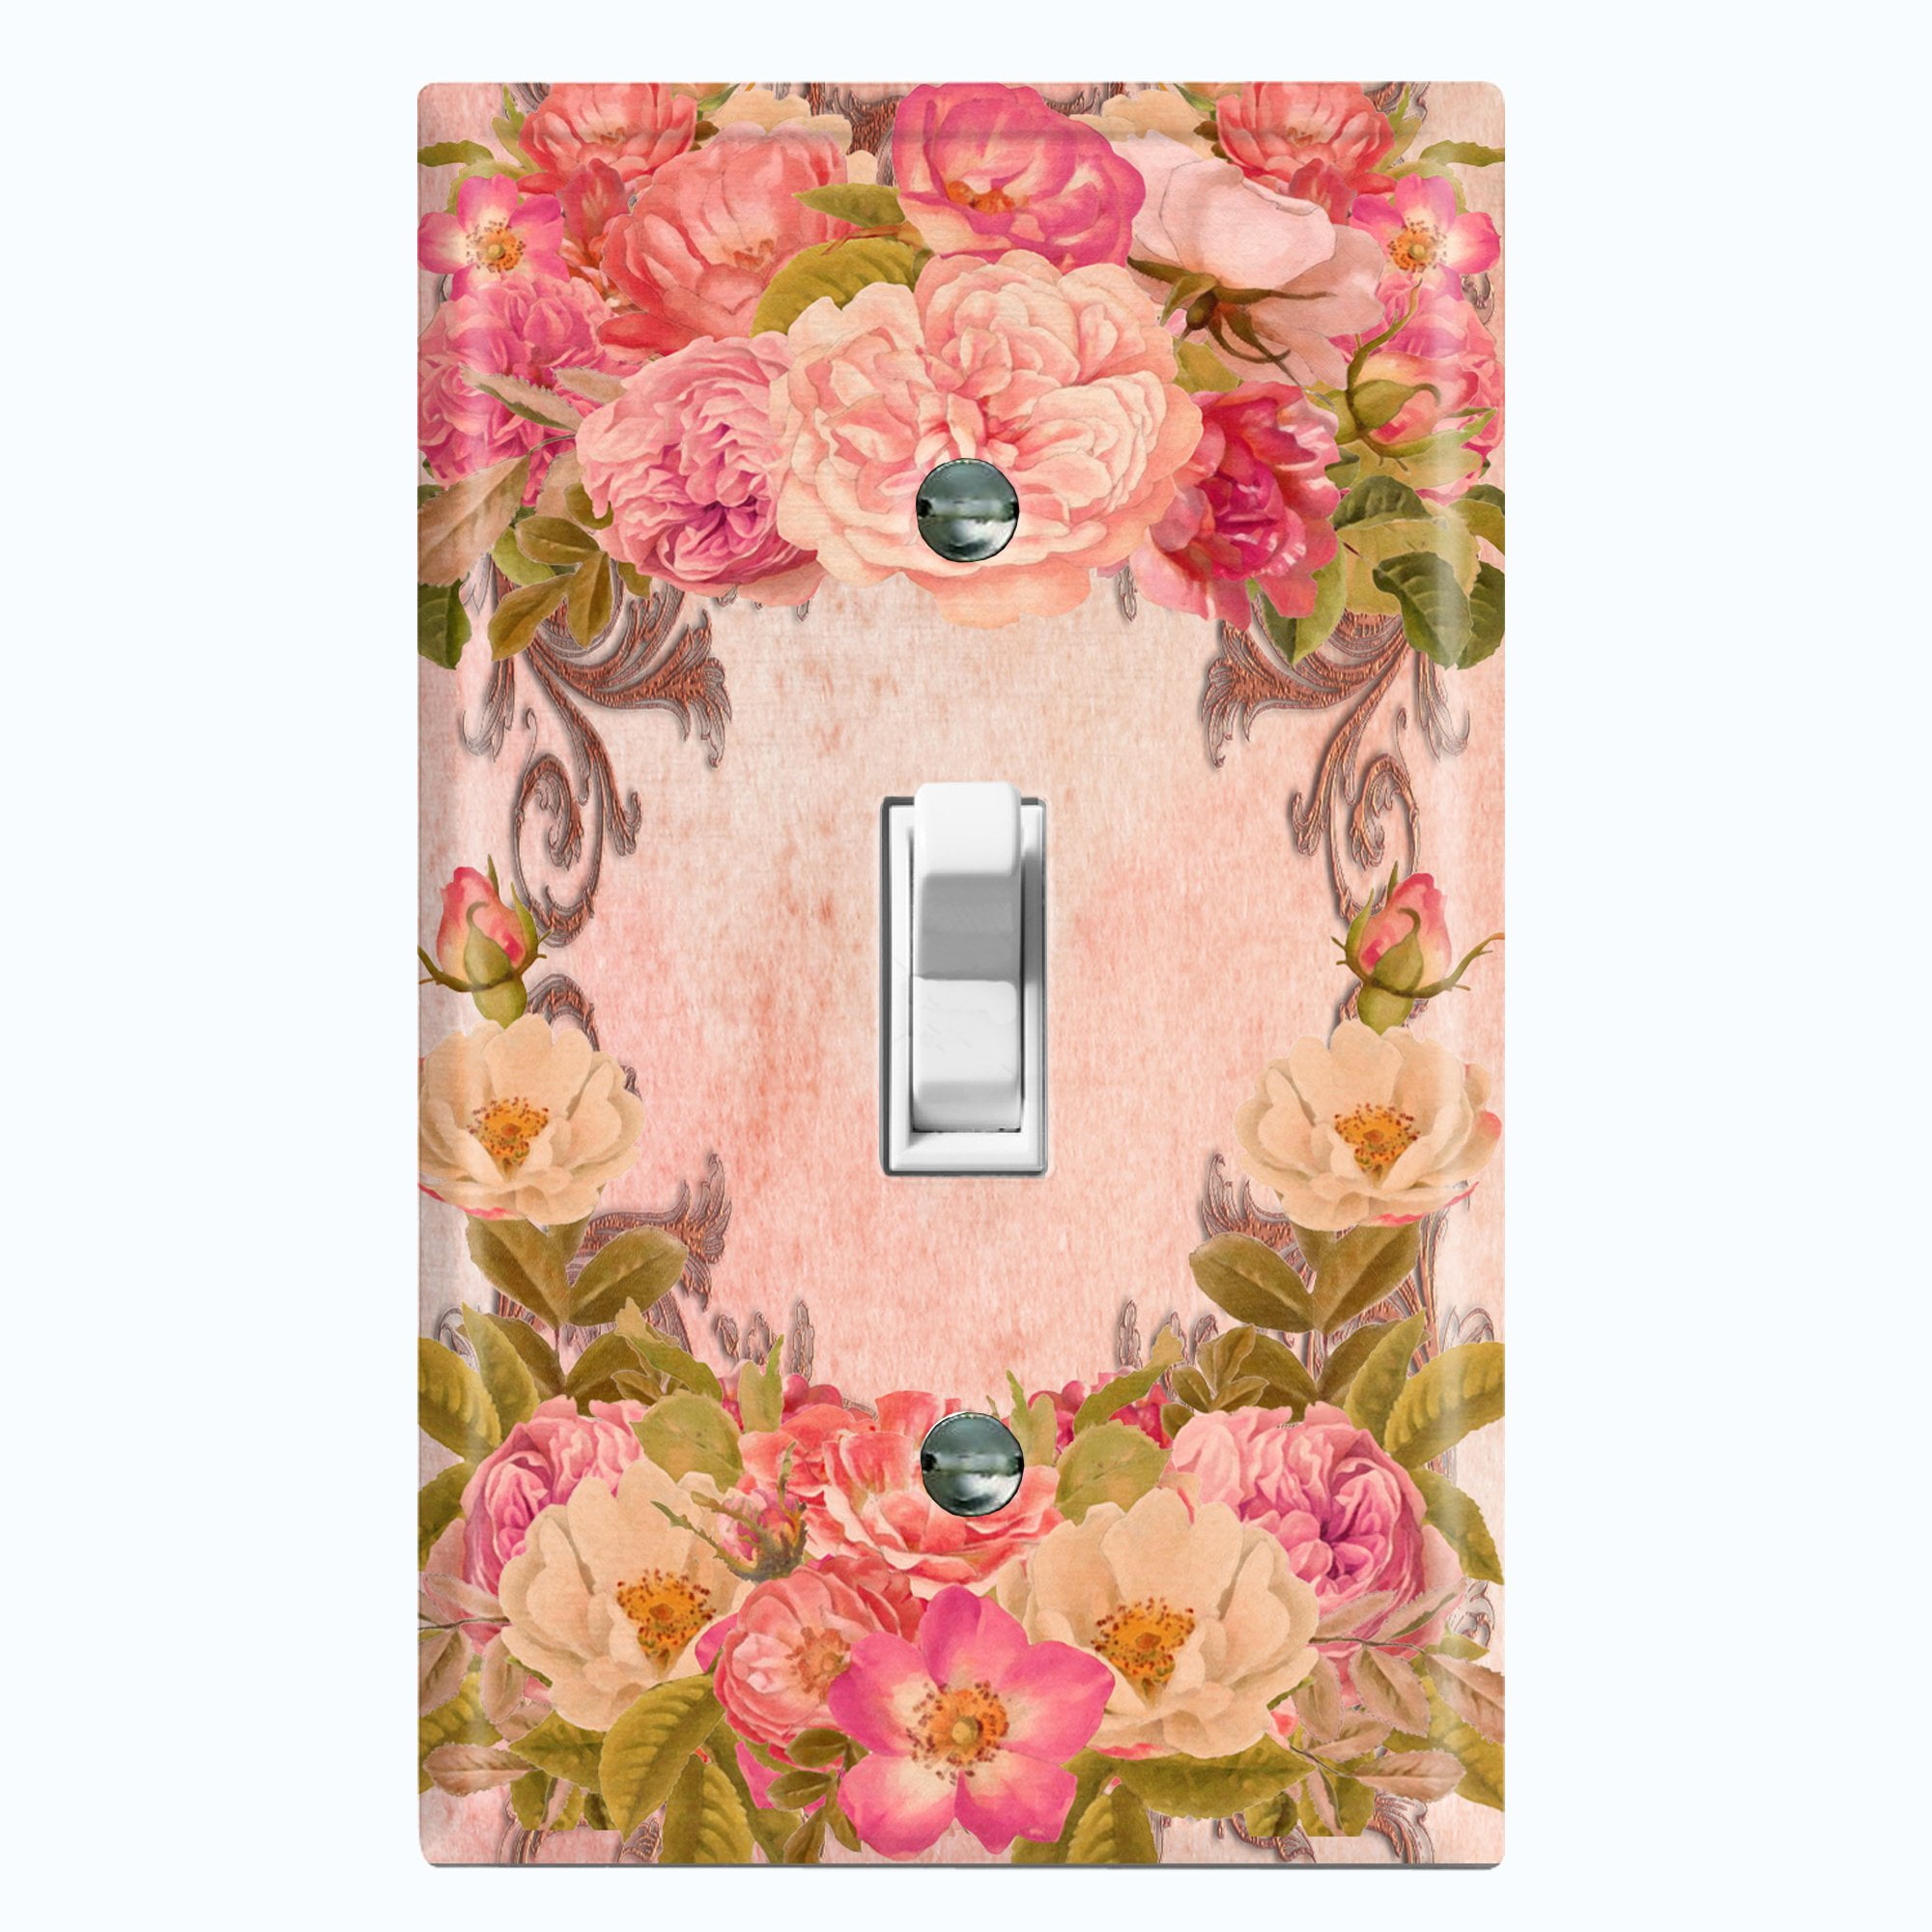 Pink Roses Switch Covers Wall Plate Graphics Wallplates,Double Rocker 